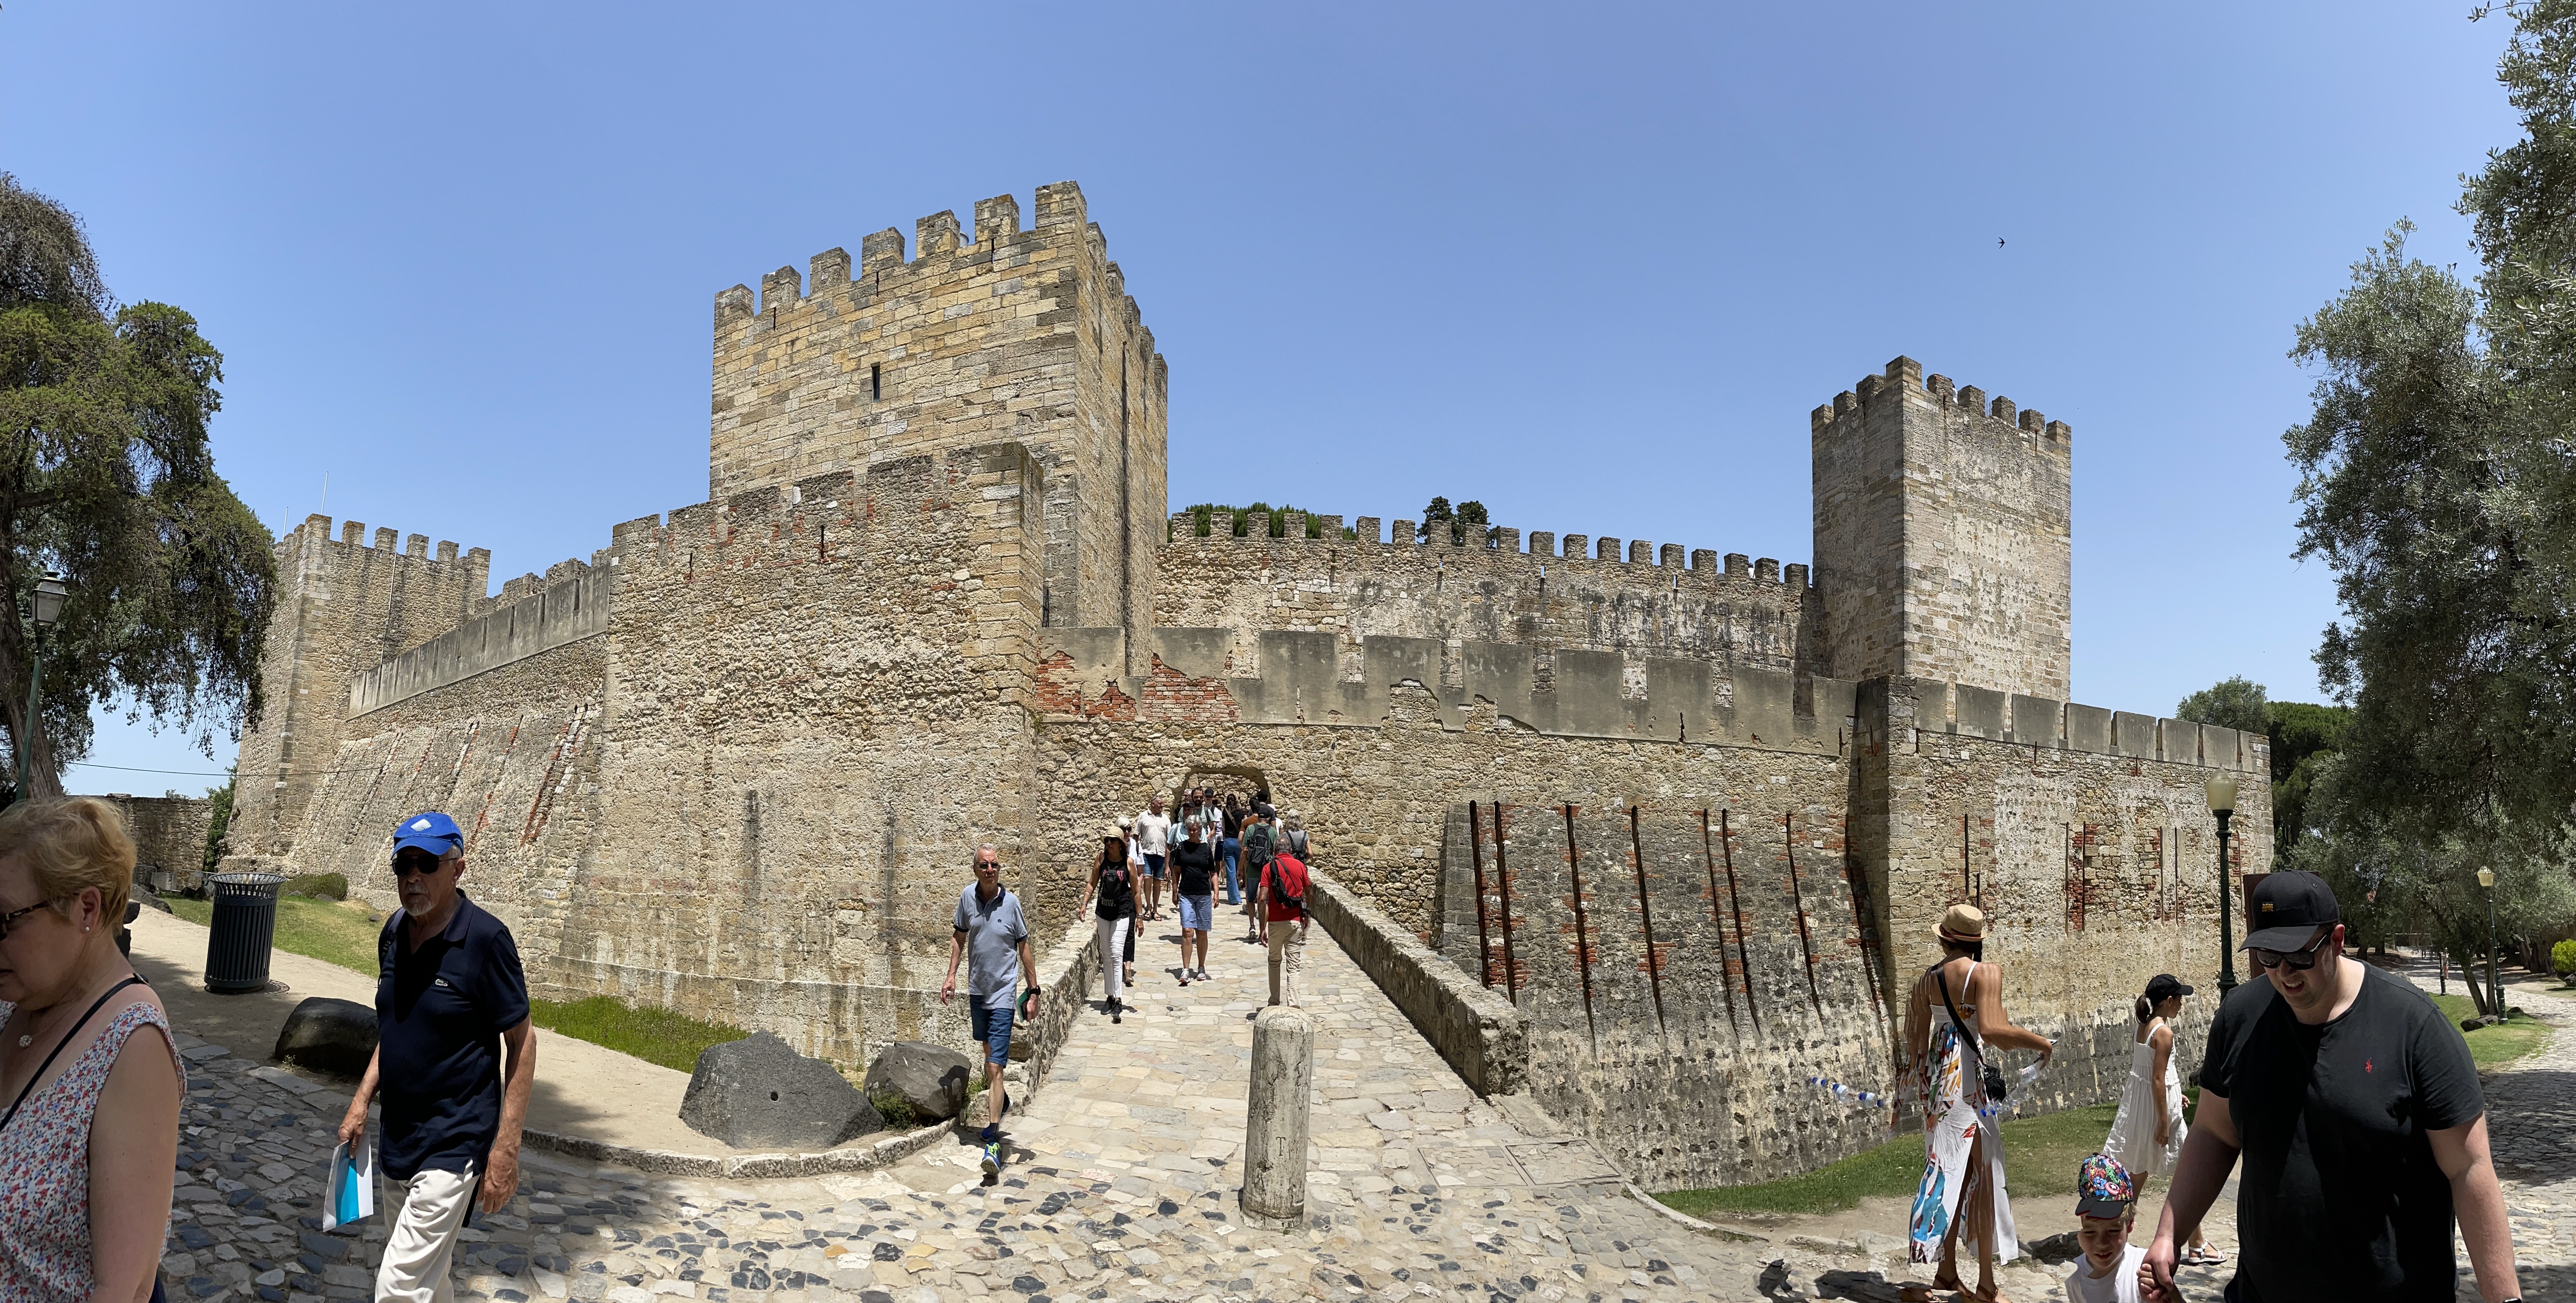 A panorama of the castle's main entrance